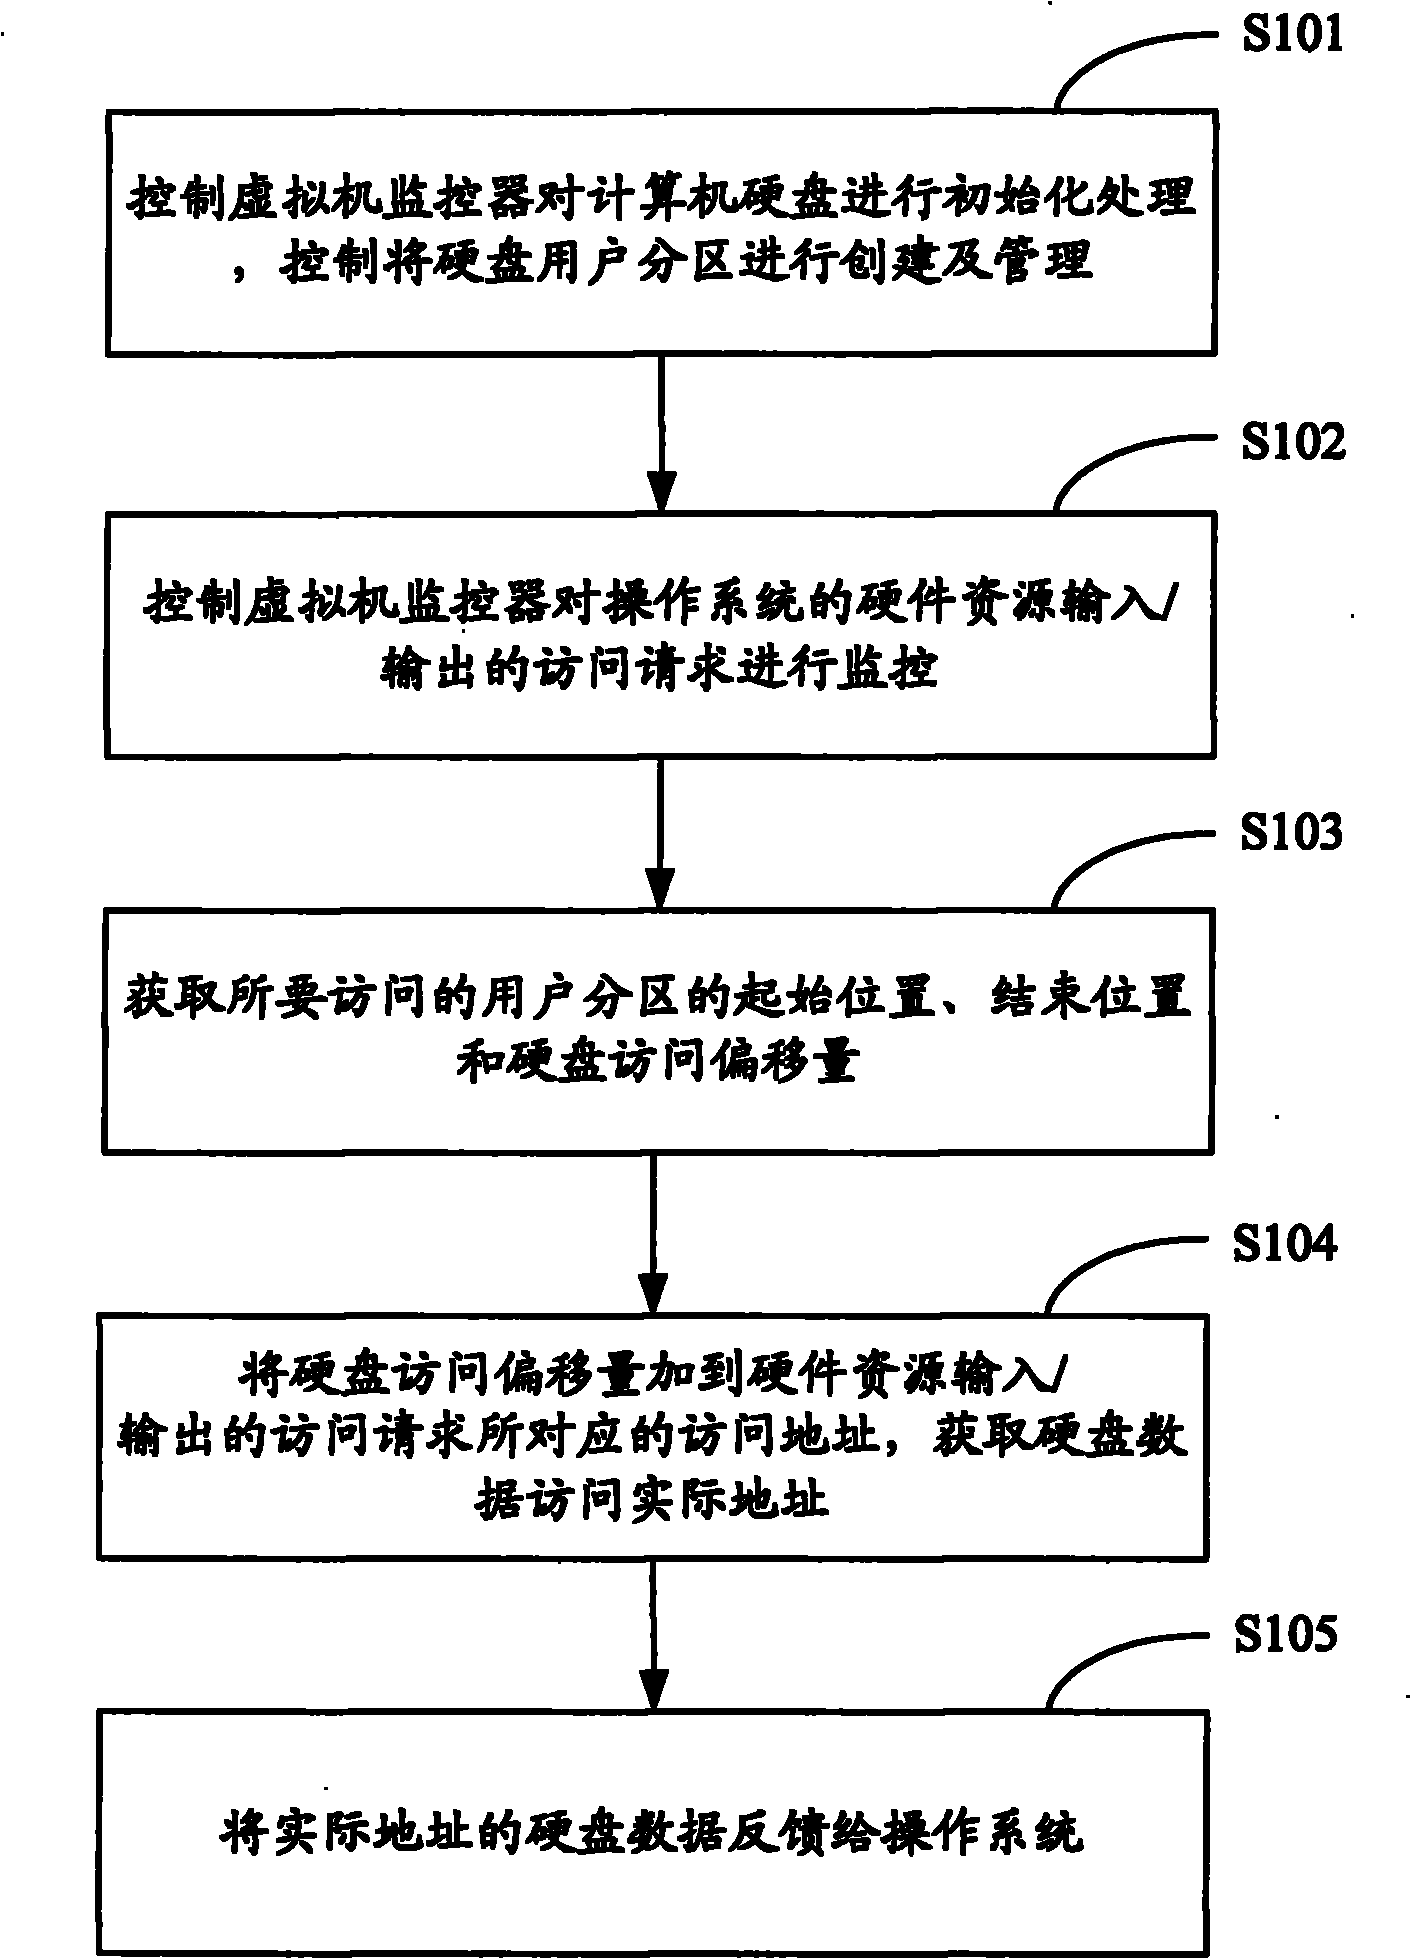 Access method and system for multi-user hard disk data